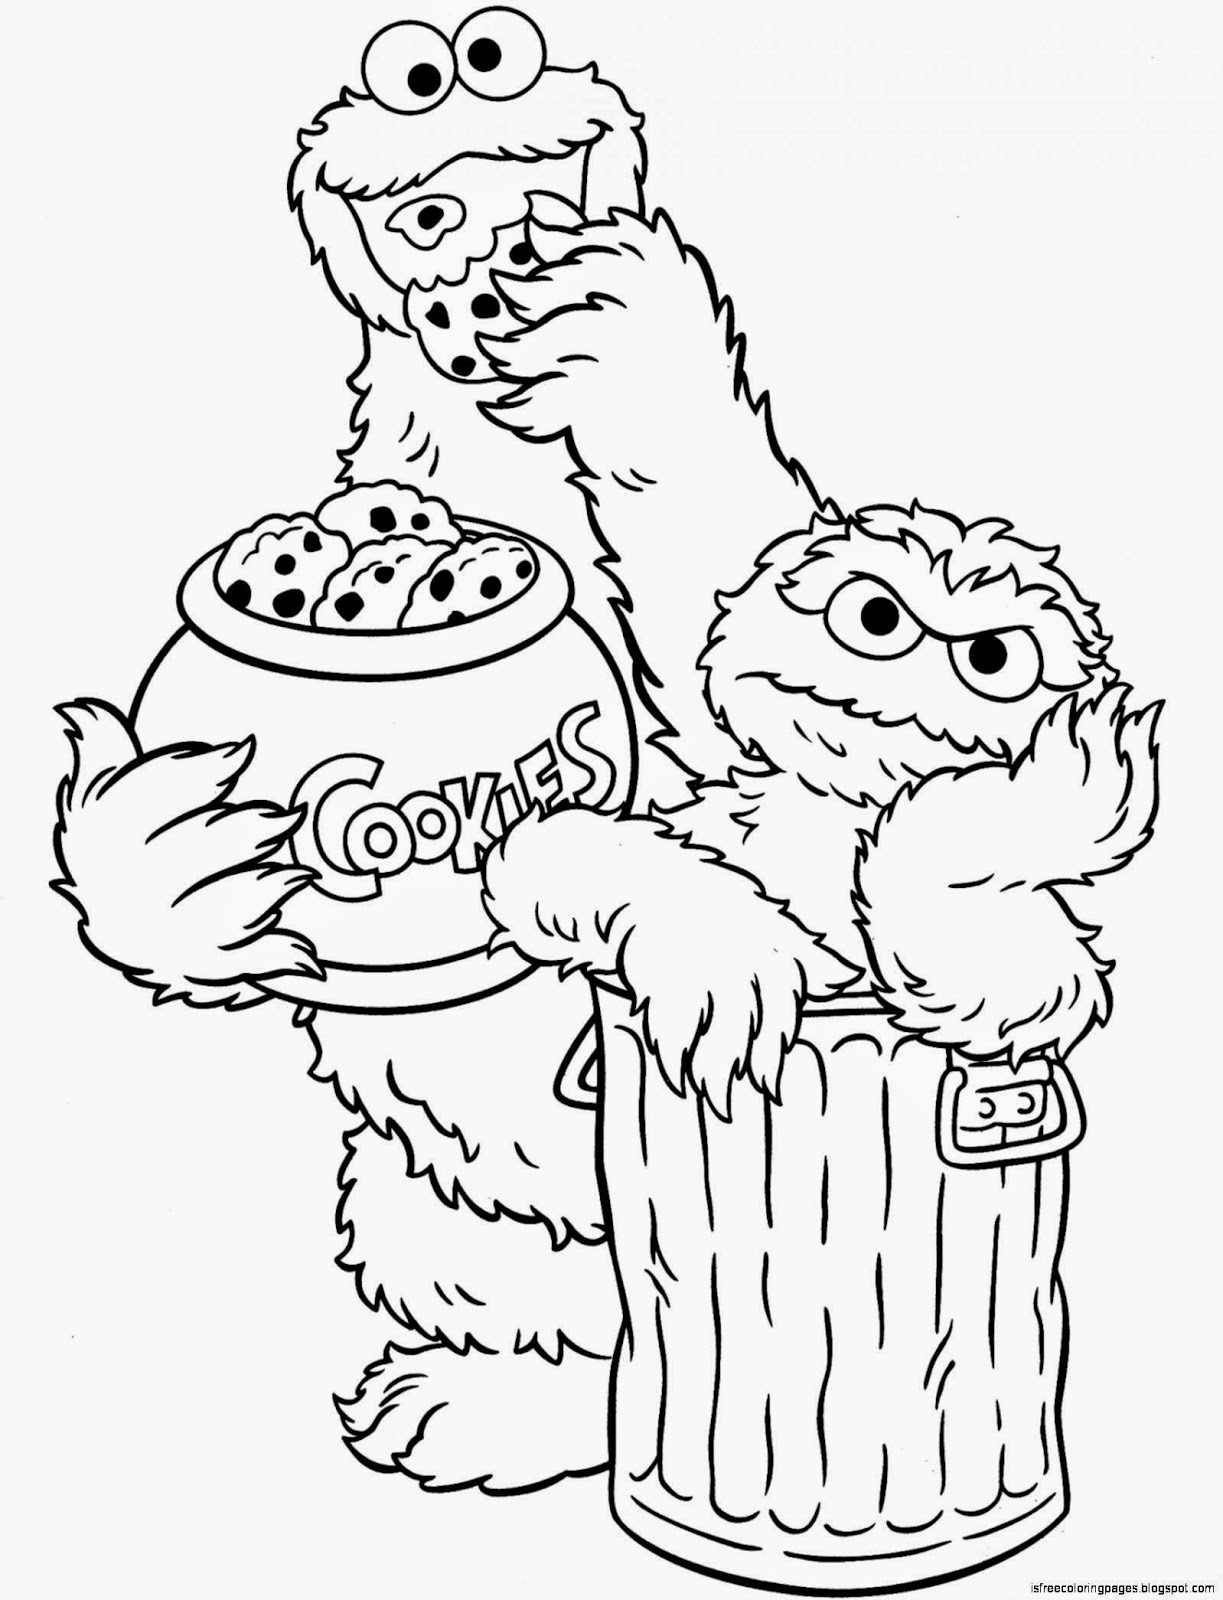 Sesame Street Coloring Books
 Sesame Street Coloring Pages